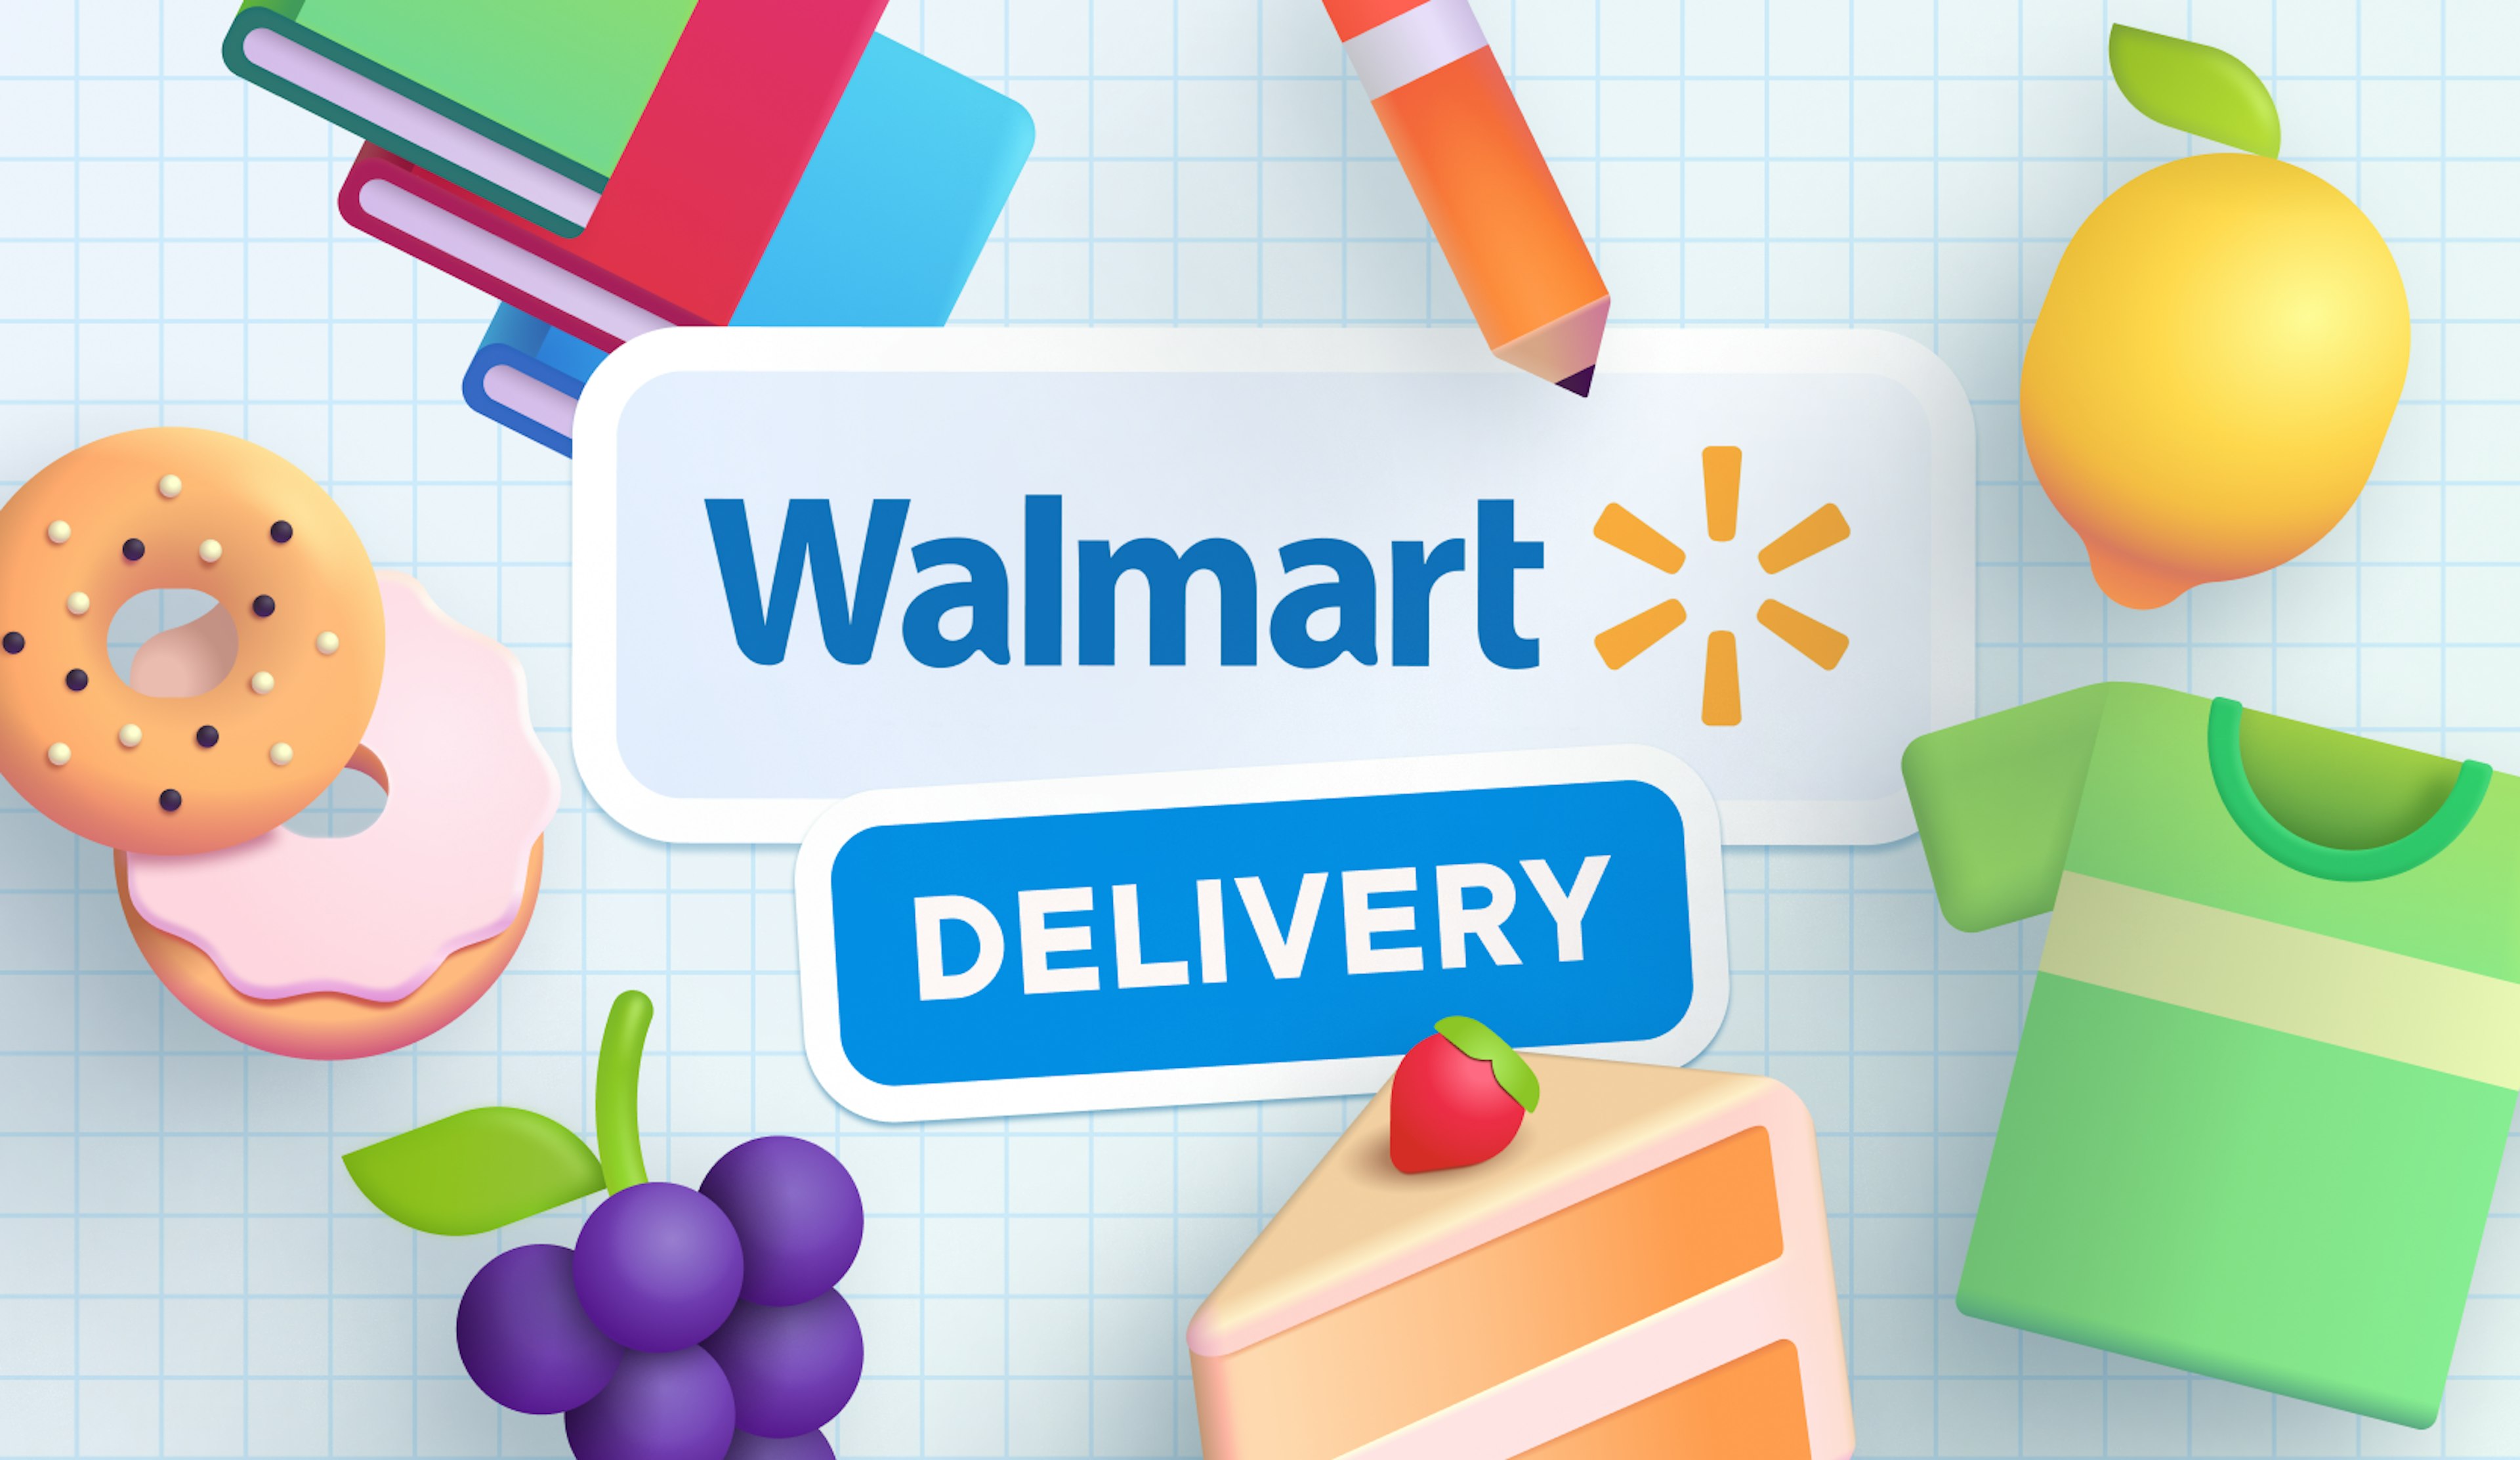 9 things you need to buy at Walmart right now